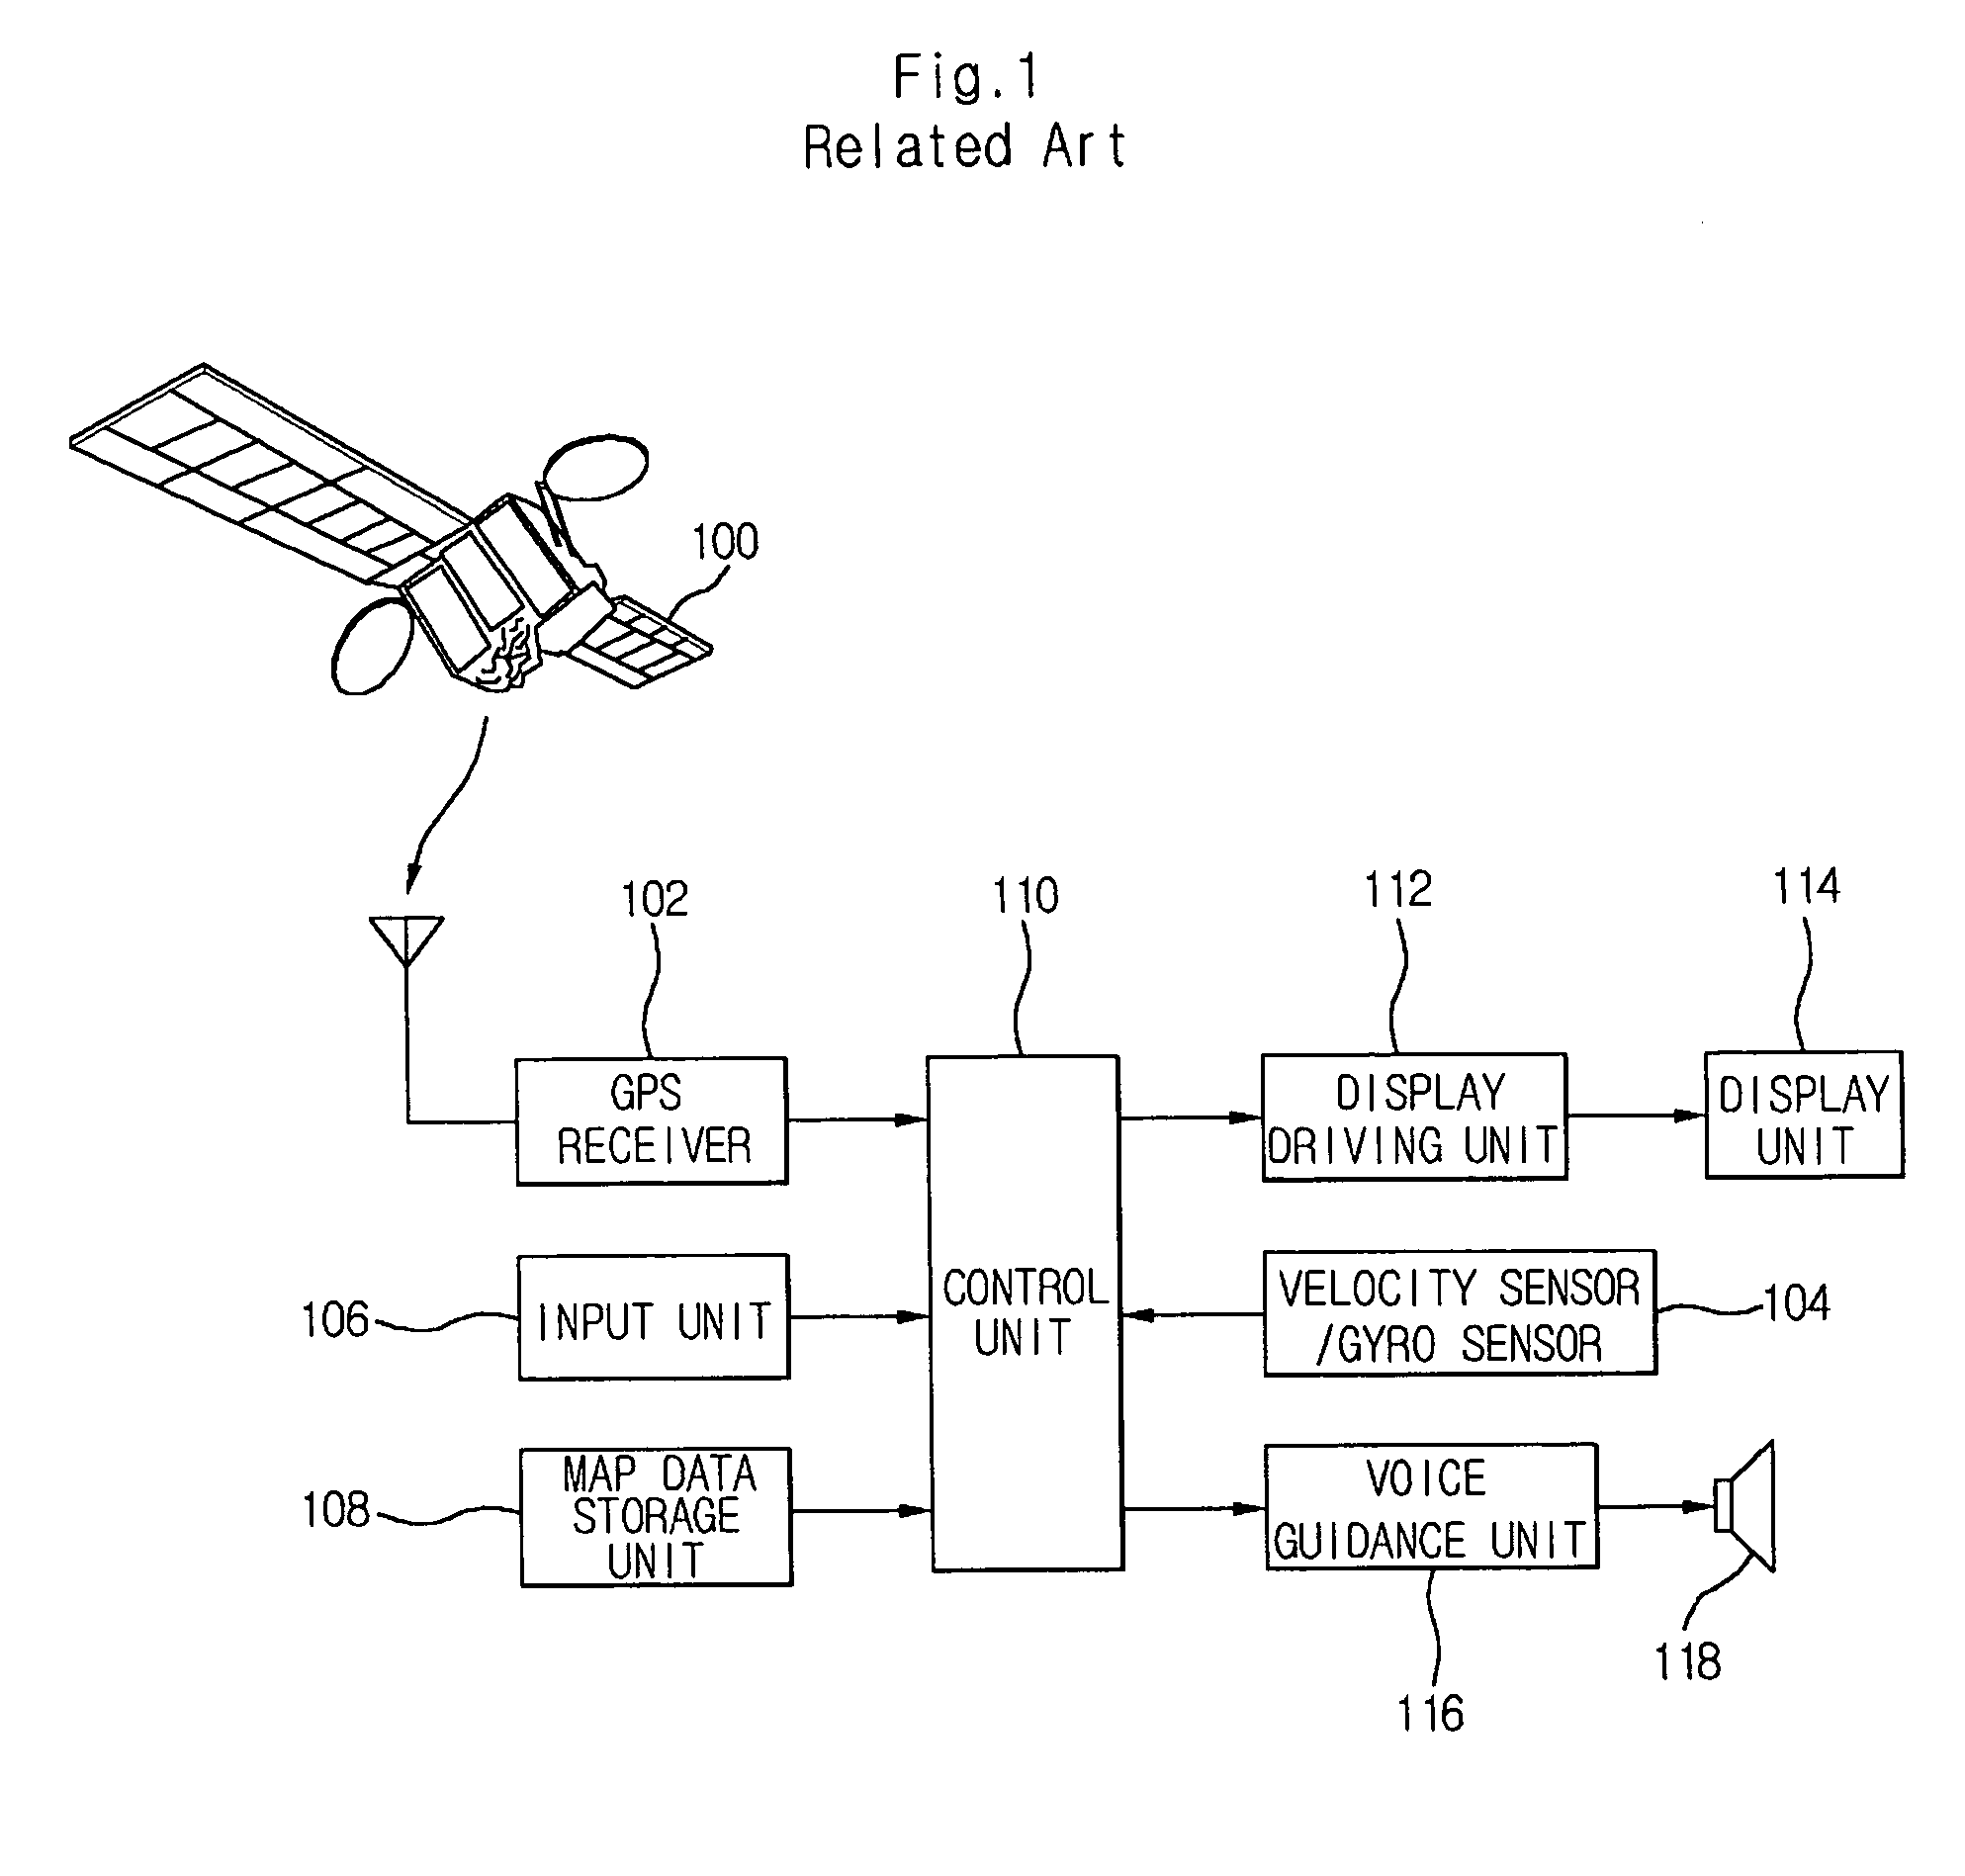 Apparatus and method for guiding location of the other party in navigation system